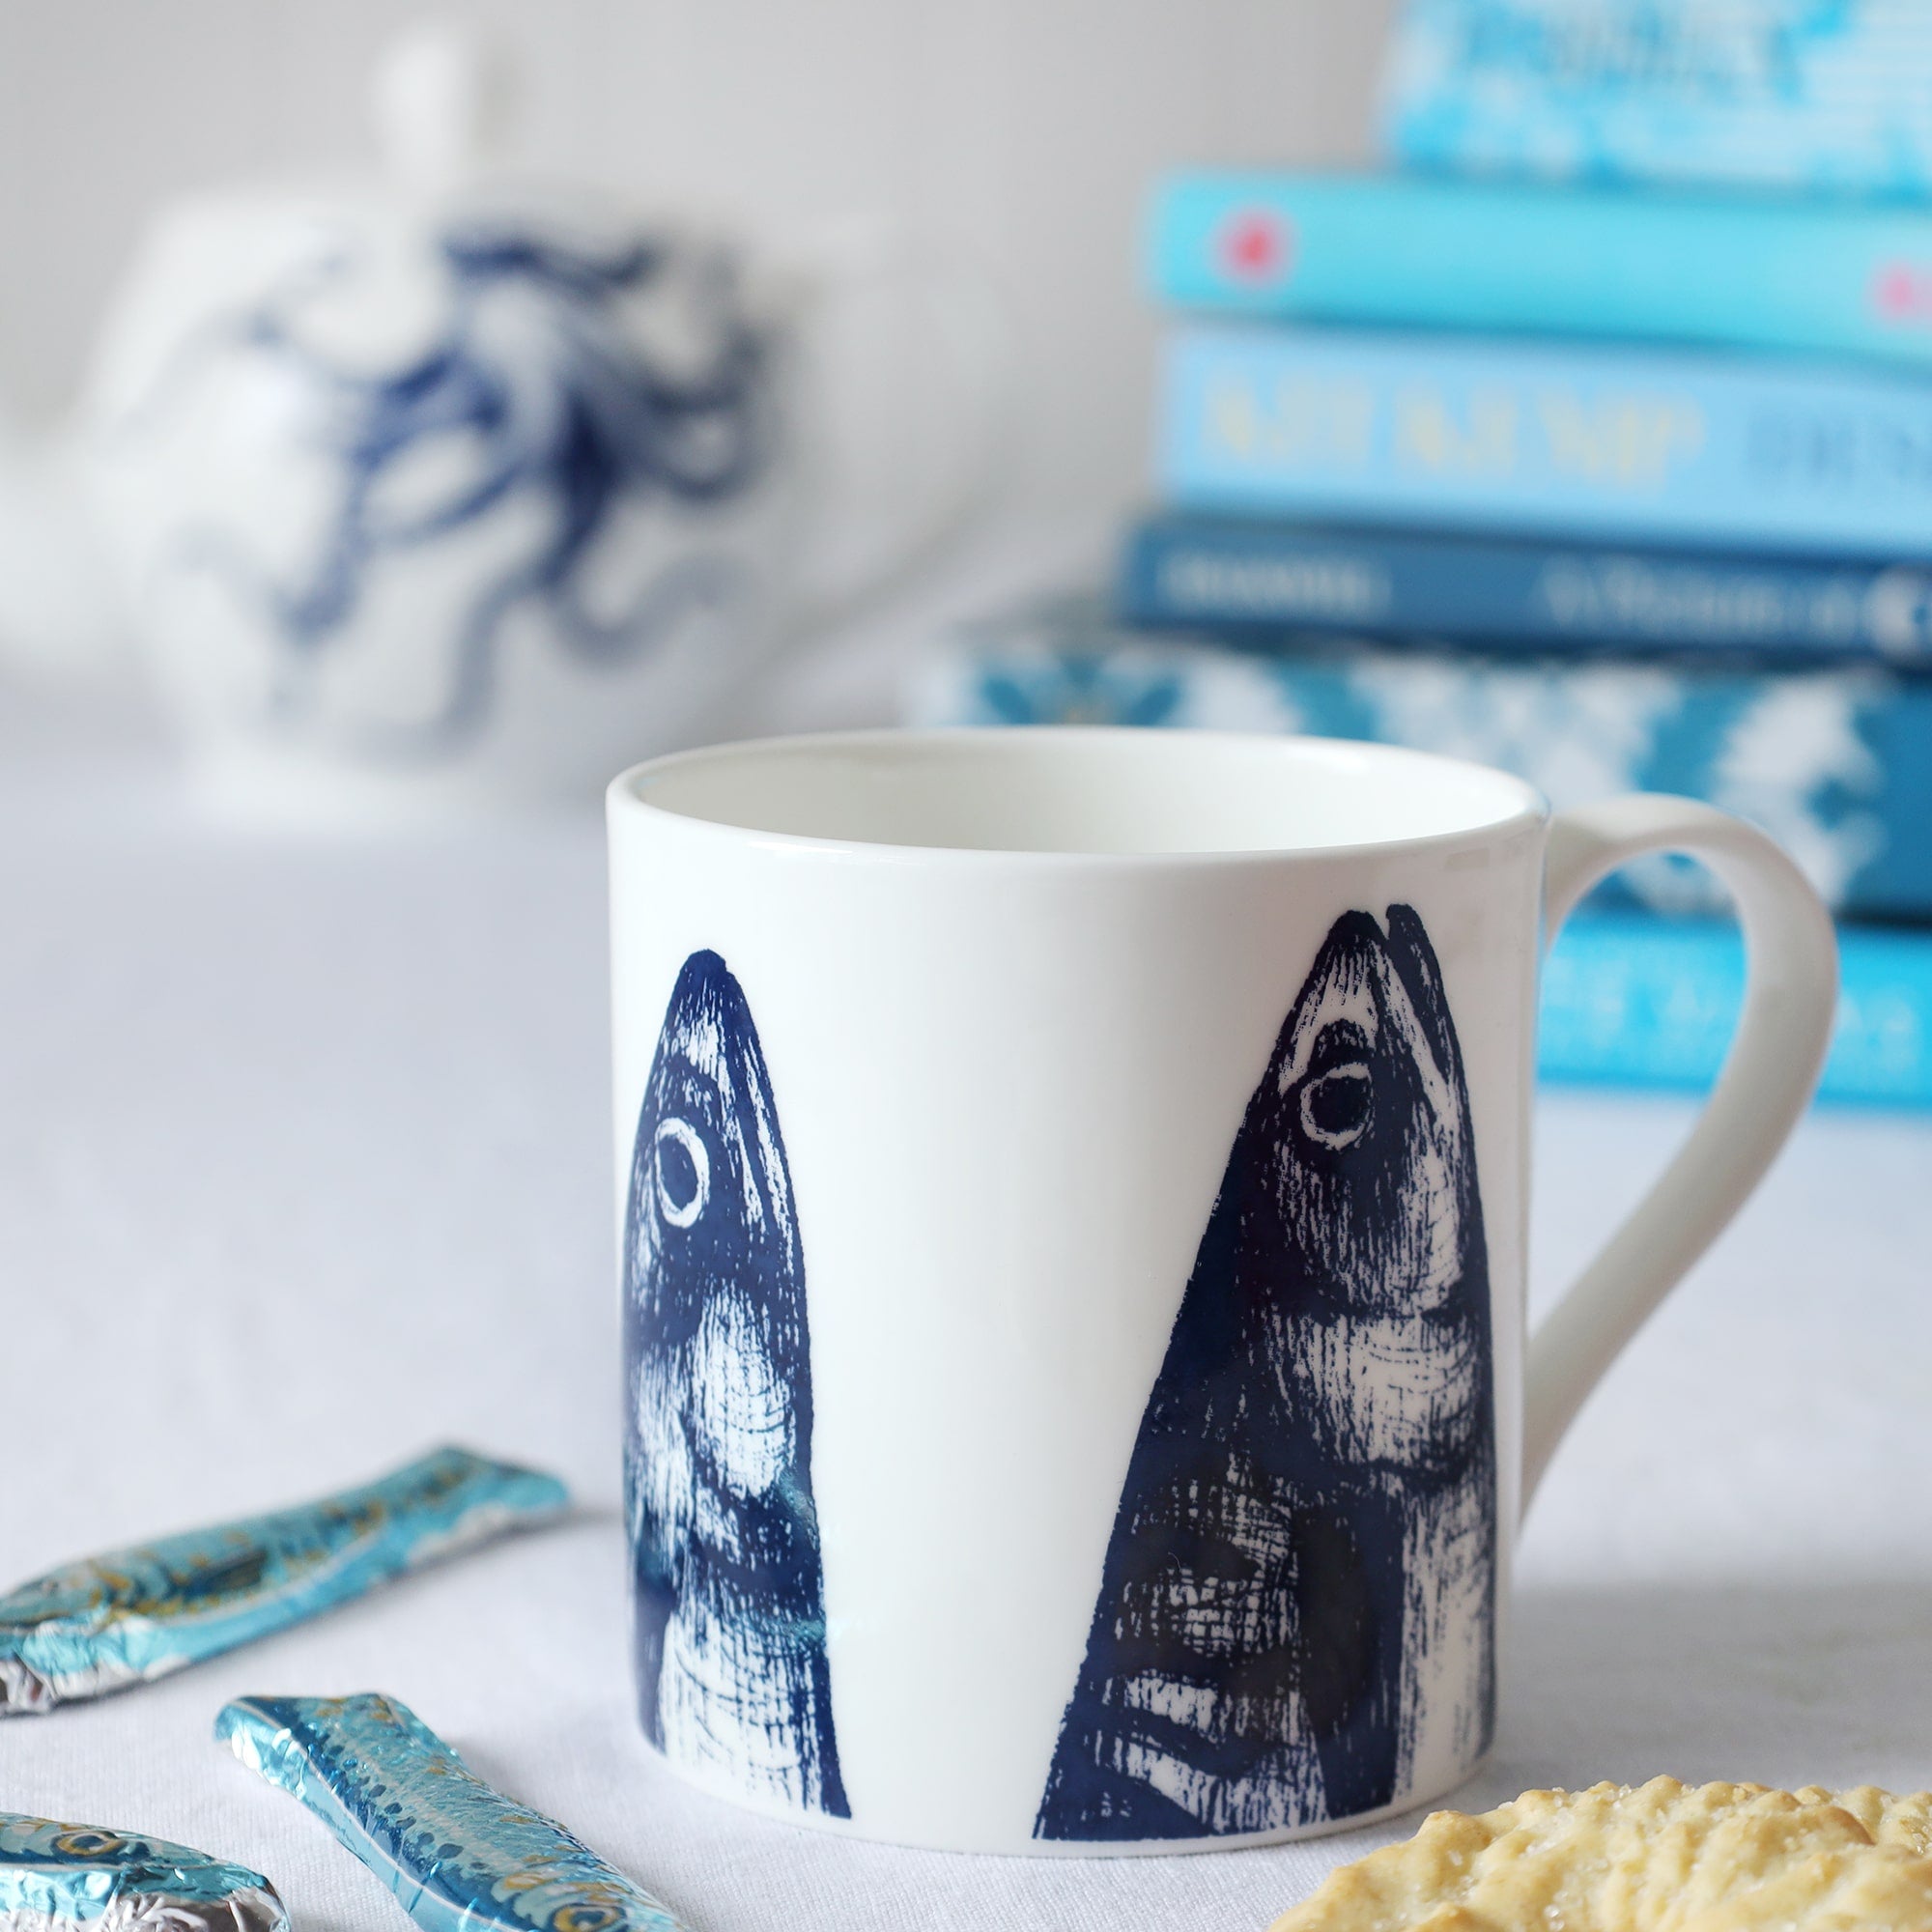 A close up of a white bone china mug with dark blue illustrated mackerel heads design coming up from the bottom of the mug. This is sitting on a white table cloth with some chocolate sardines and an octopus teapot & pile of blue books int he background.